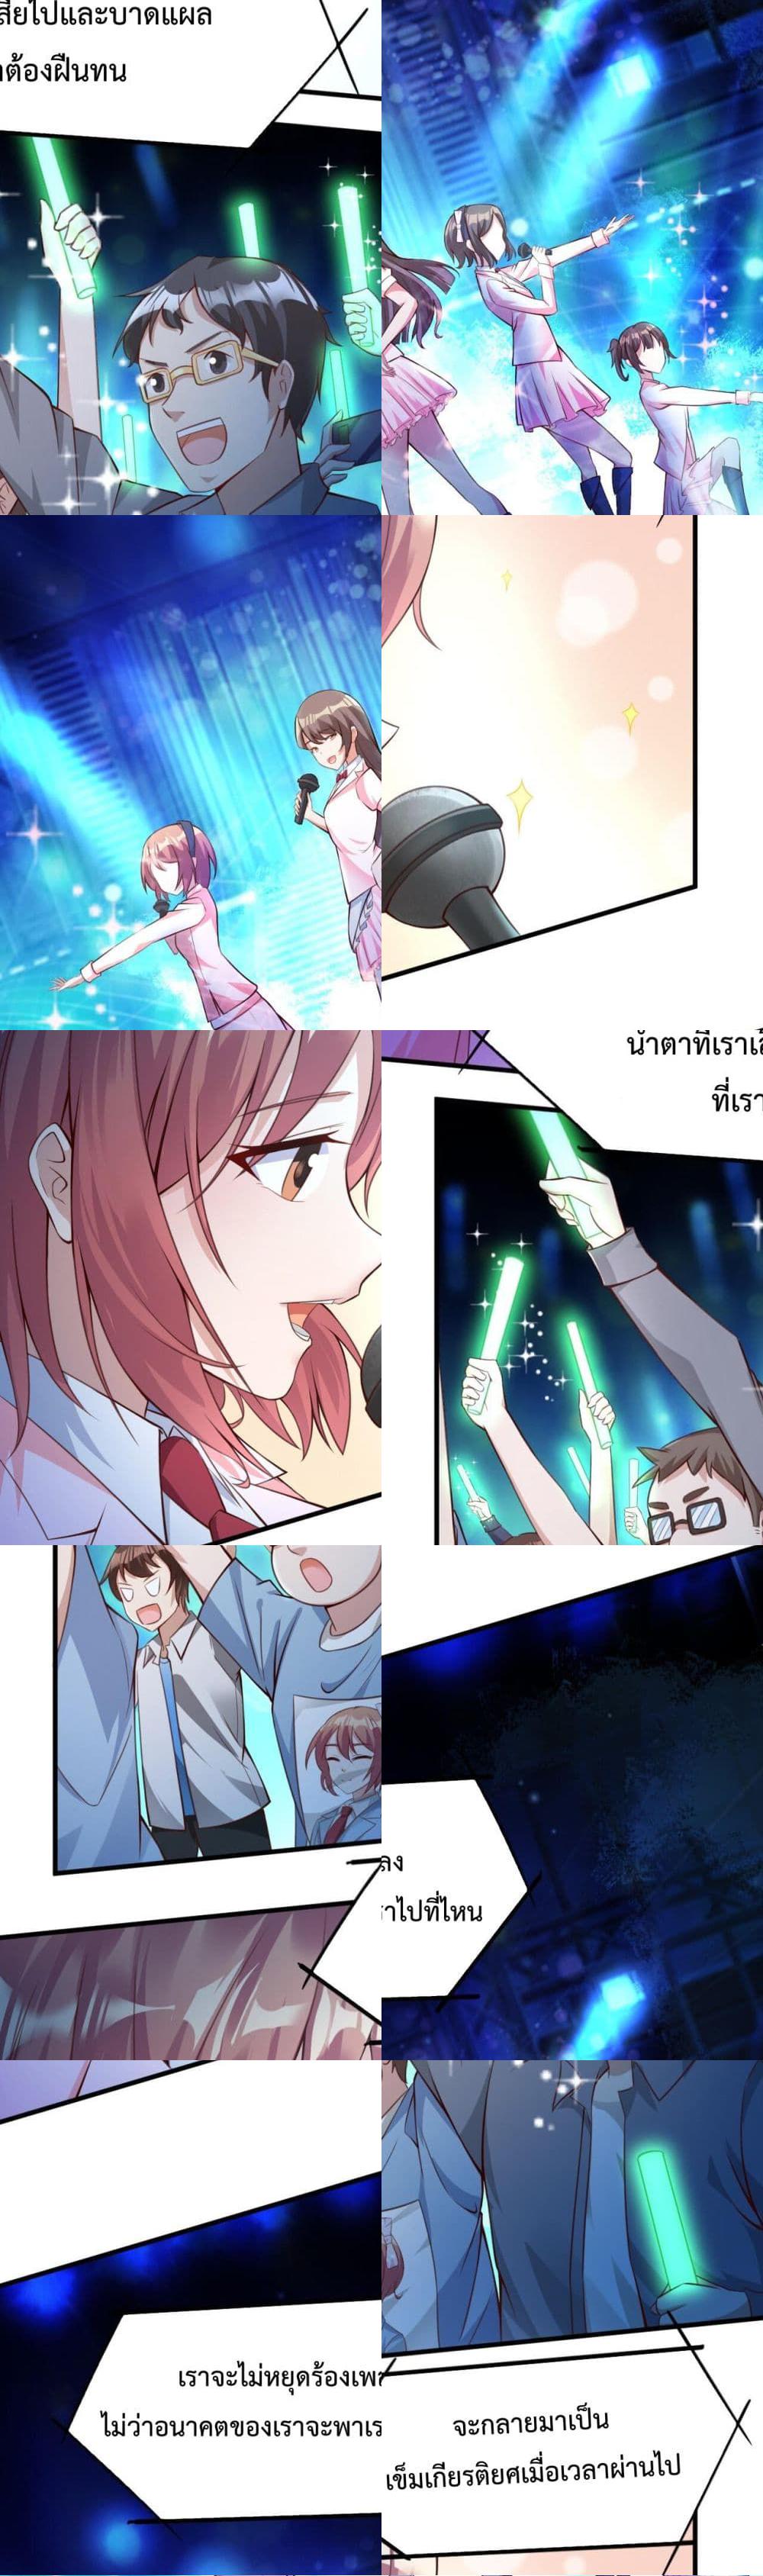 Idol Manager In Another World 1 (4)